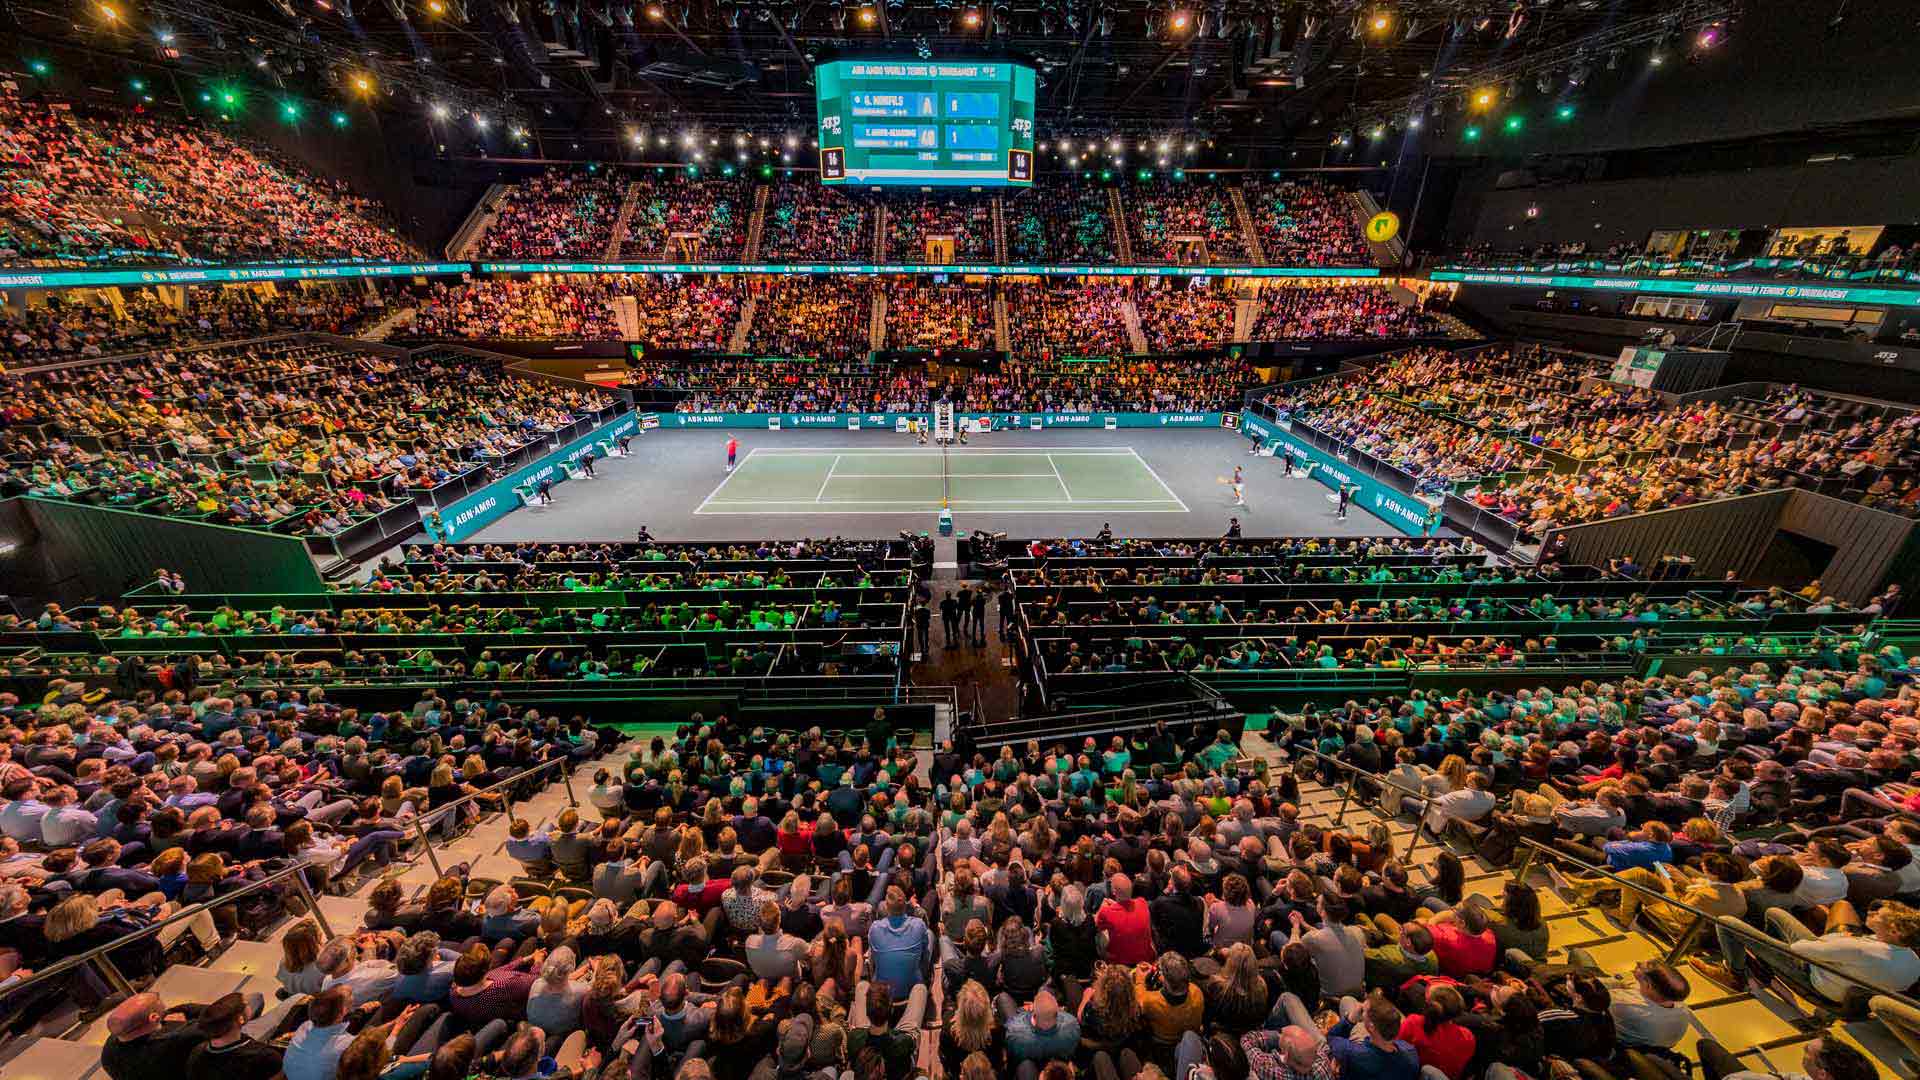 TSN Confirms Massive Slate of ATP Tennis Coverage, Kicking Off with ABN  AMRO WORLD TENNIS TOURNAMENT from Rotterdam, Beginning Today - Bell Media